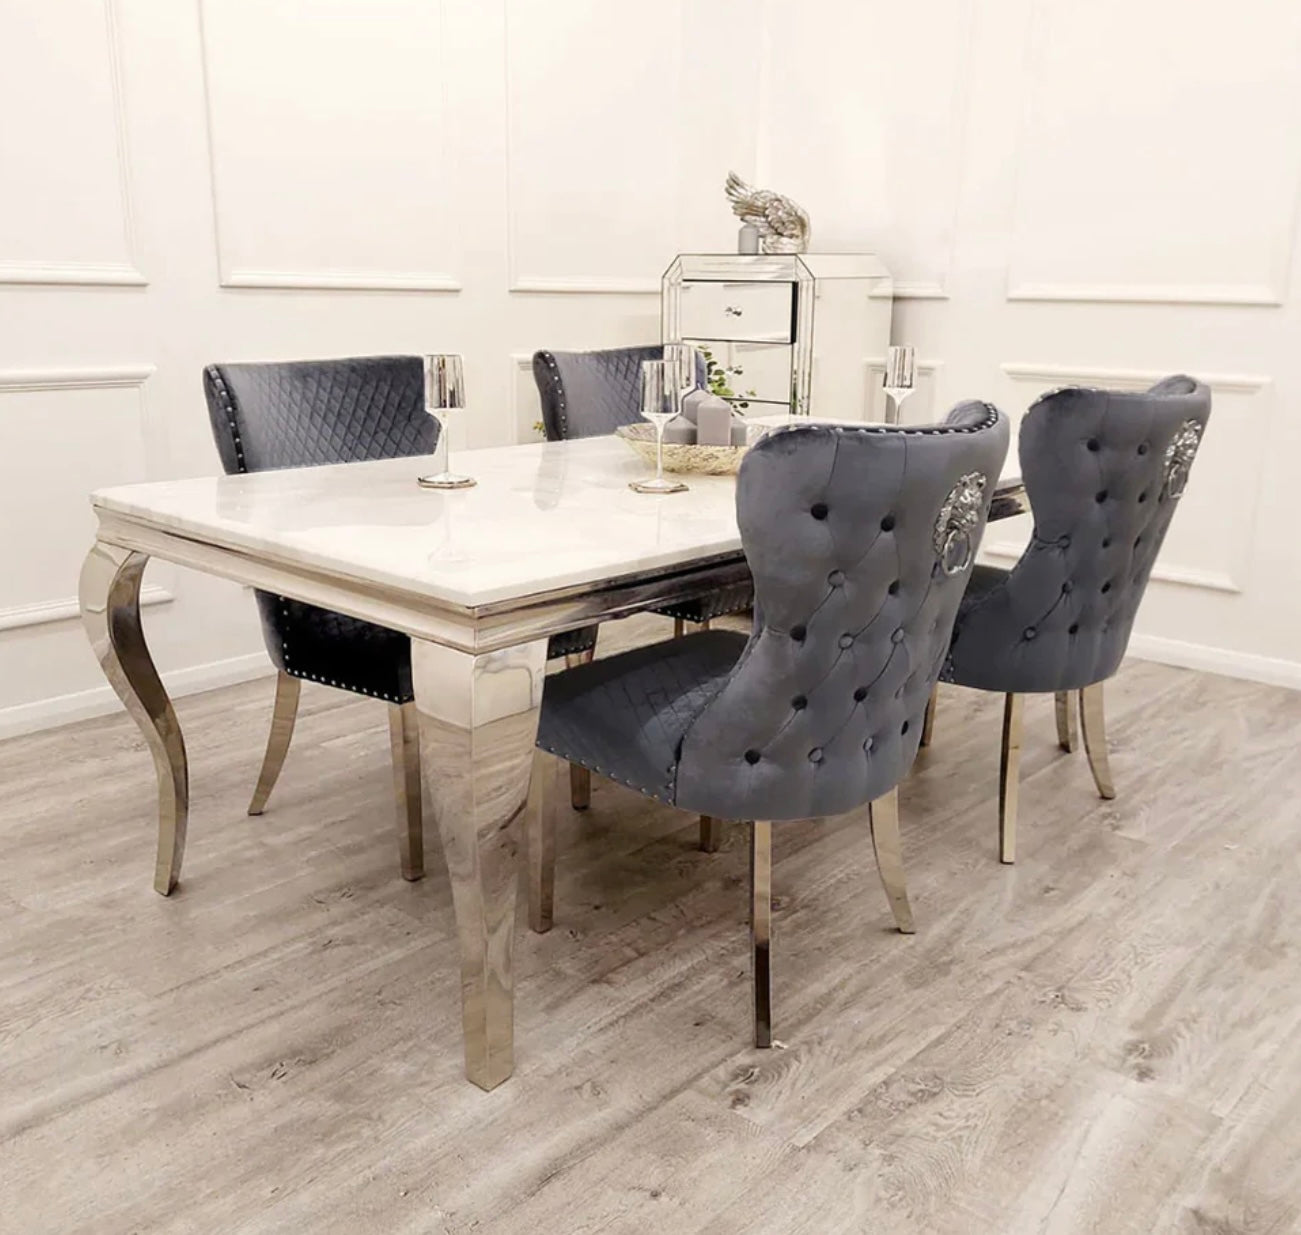 Louis 180cm white marble dining table with Lewis lion knocker chairs